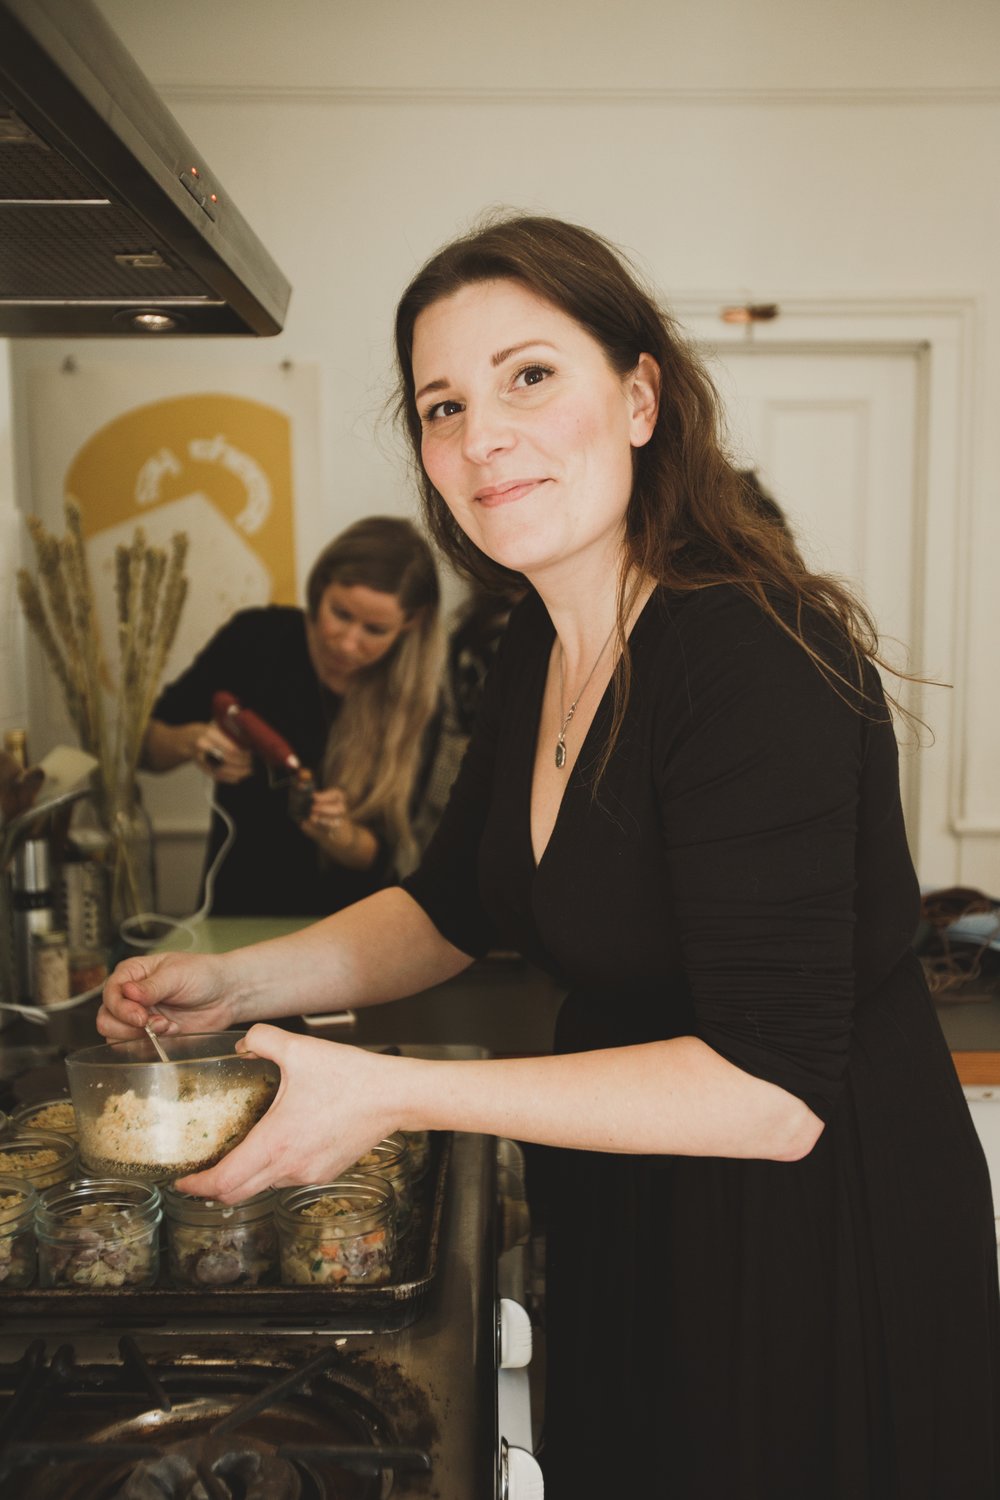 Carmon Spagnola twists her kitchen training at Le Cordon Bleus Paris with witchcraft ties to concoct truly magical dishes in her upcoming book, “The Spirited Kitchen: Recipes and Rituals for the Wheel of the Year.”